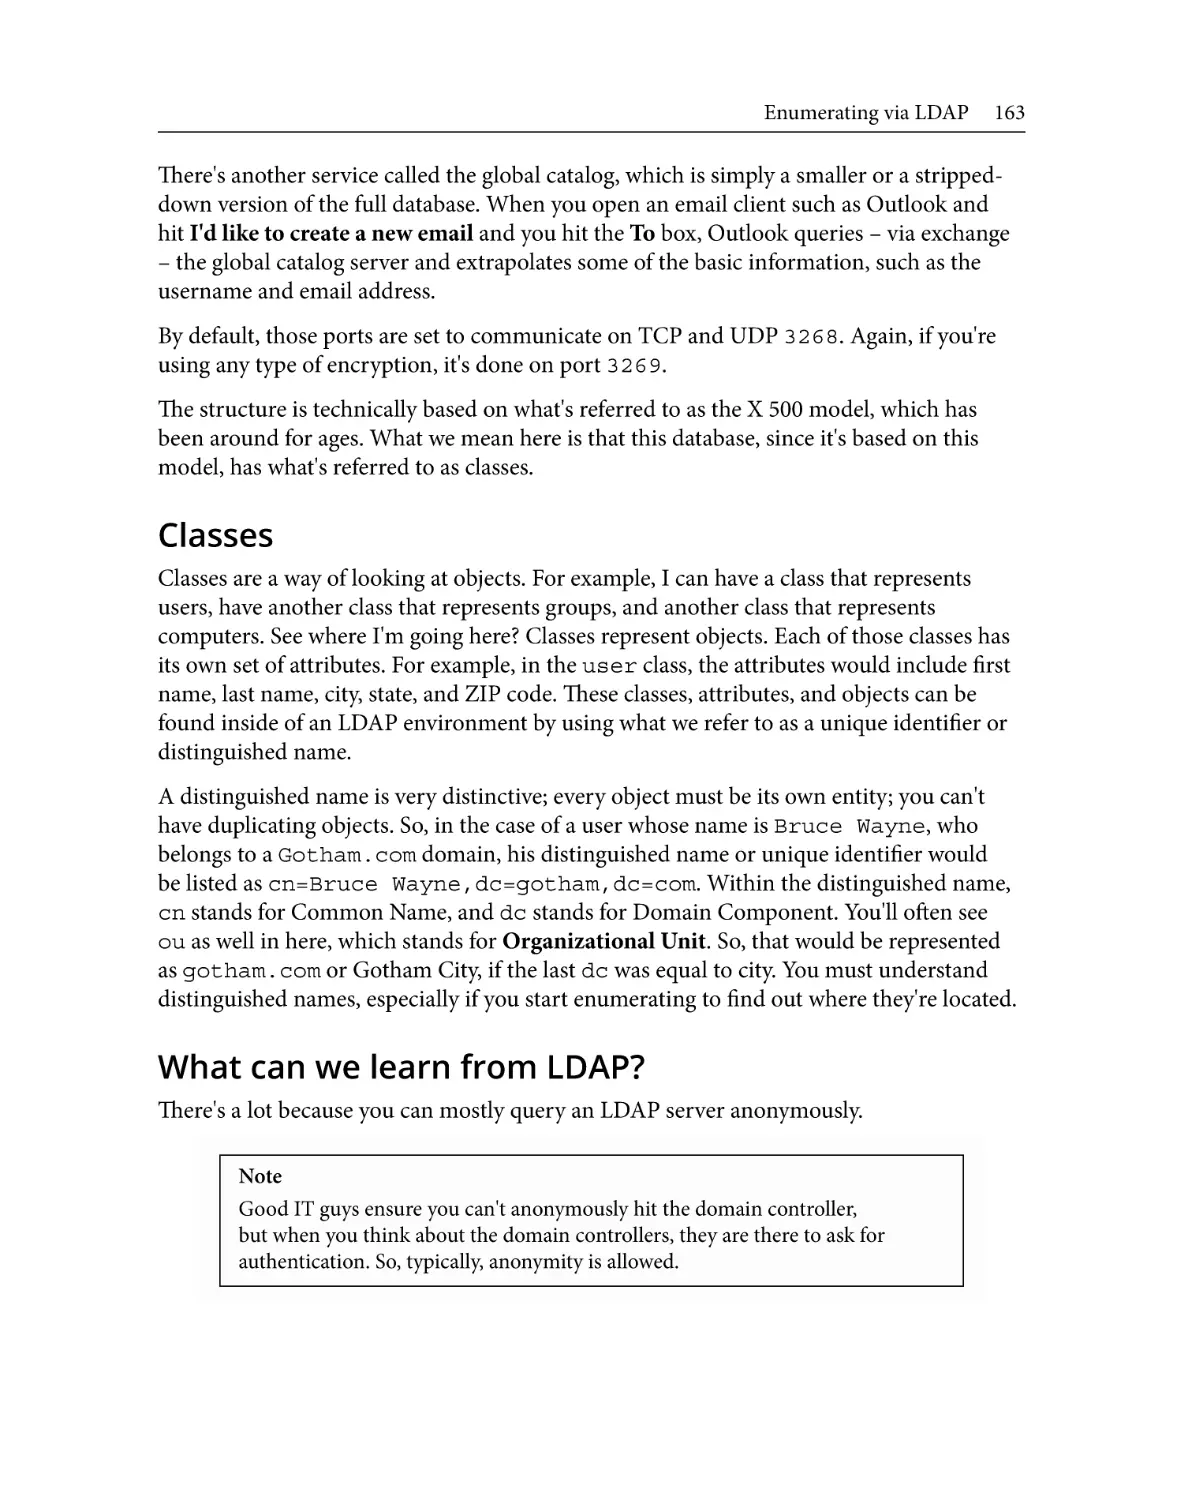 Classes
What can we learn from LDAP?